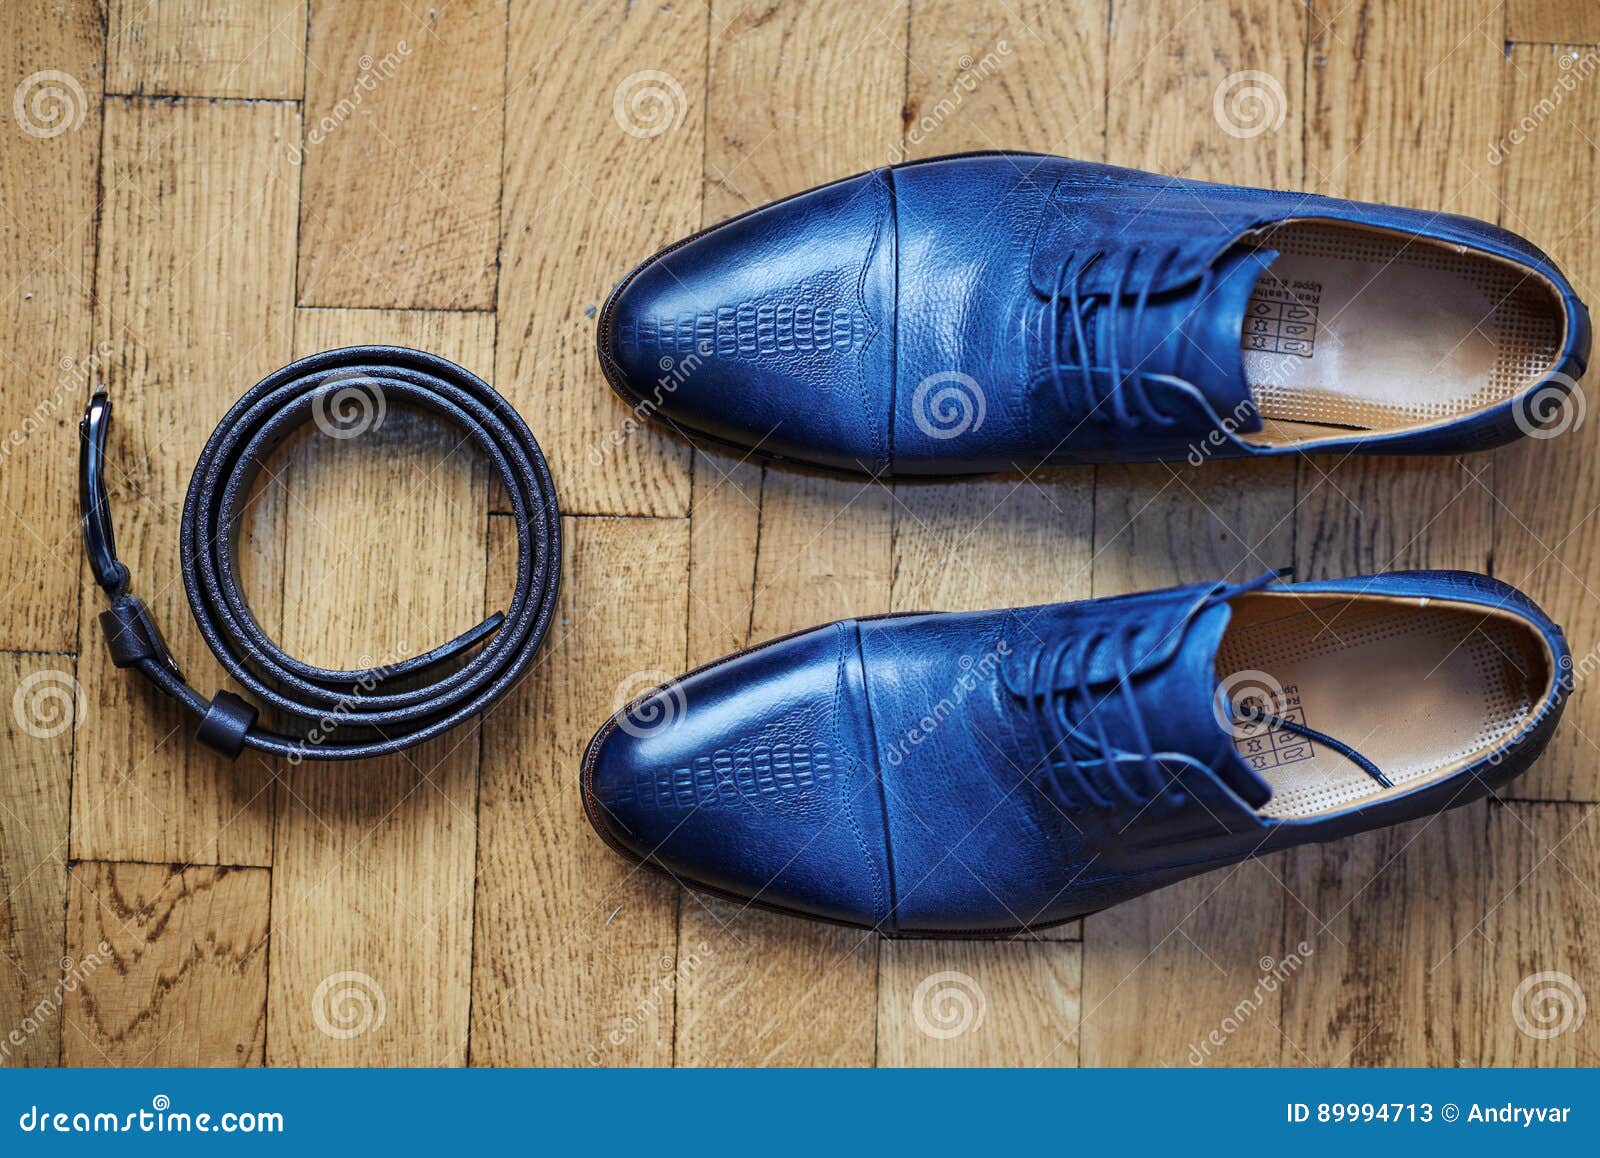 Men`s shoes and glasses stock image. Image of strap, time - 89994713